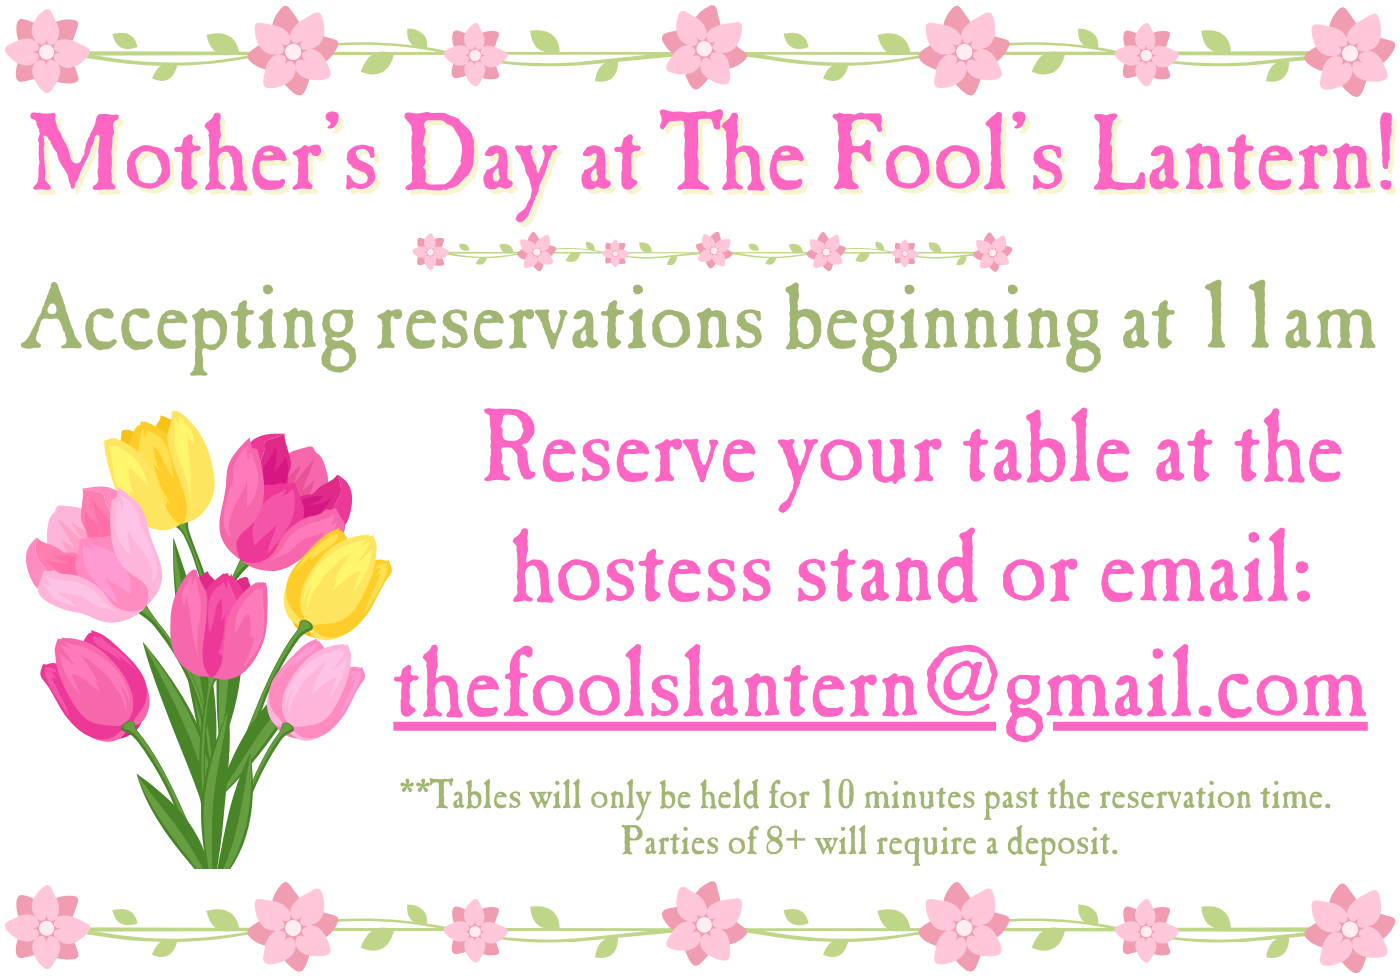 Mother's Day at The Fool's Lantern